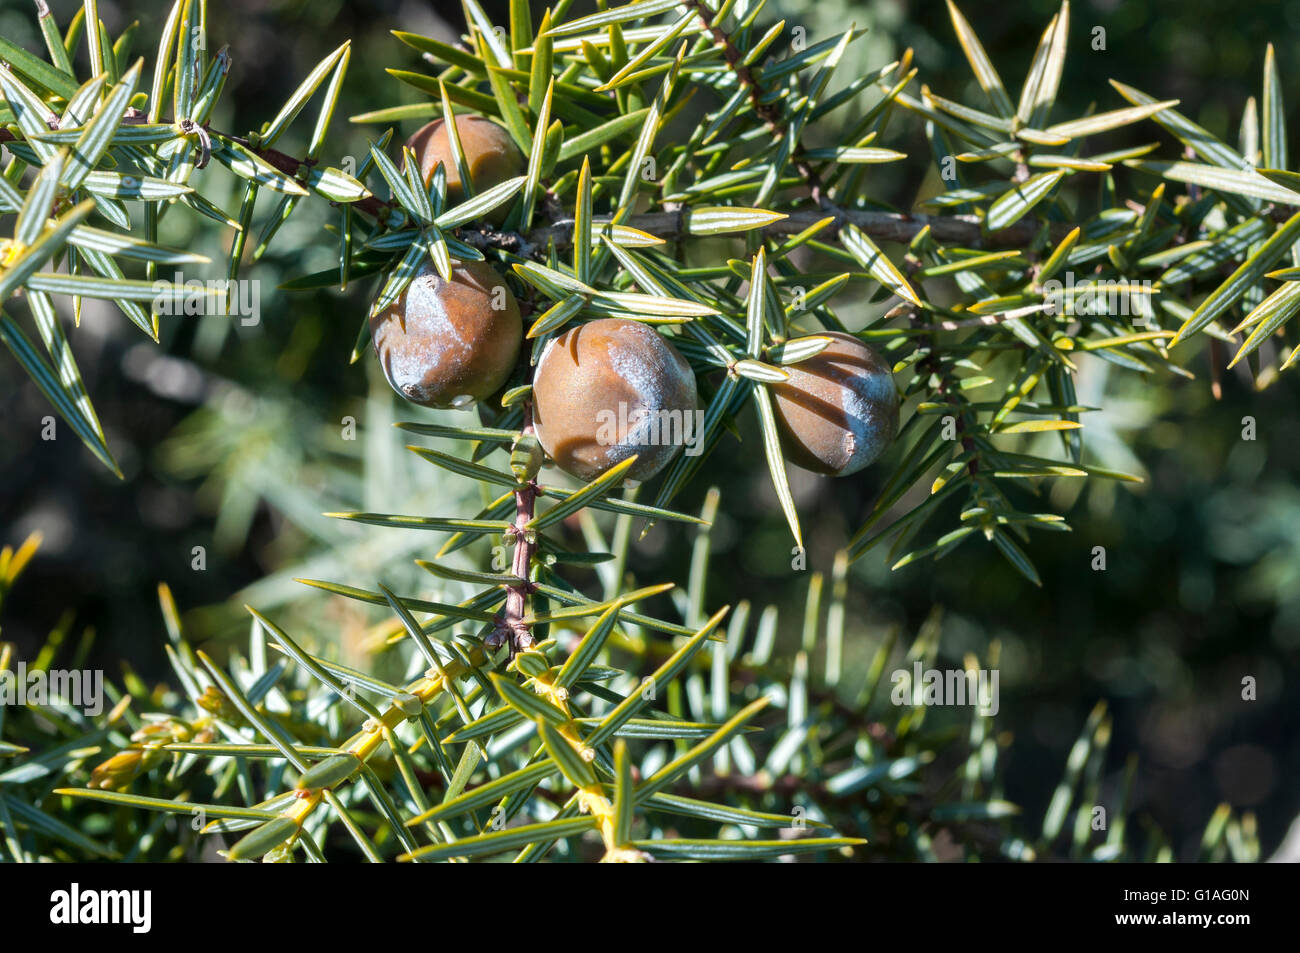 Fruits and leaves of Prickly juniper, Juniperus oxycedrus. Photo taken in Guadarrama Mountains, Madrid, Spain Stock Photo